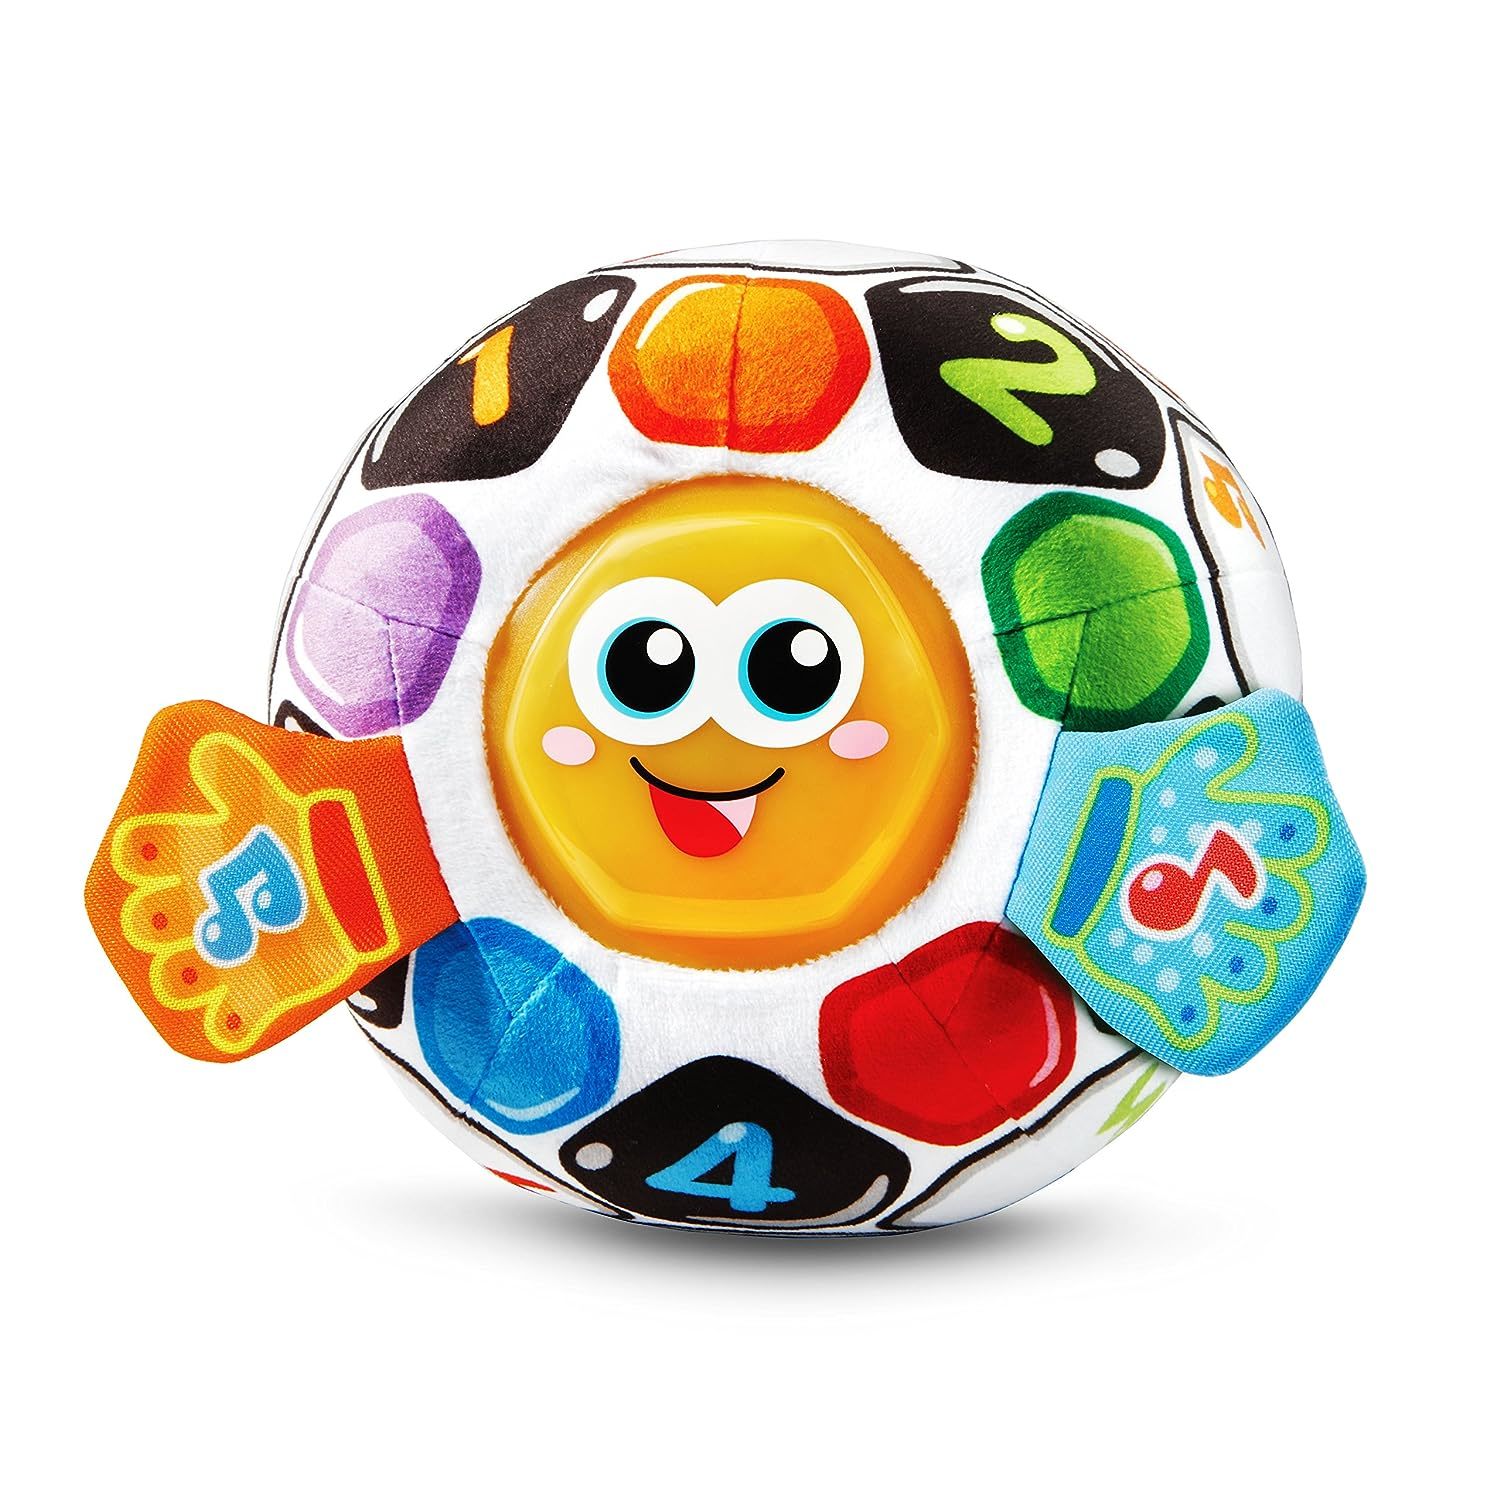 VTech Bright Lights Soccer Ball, Multicolor, for 6 months to 36 months - $24.69